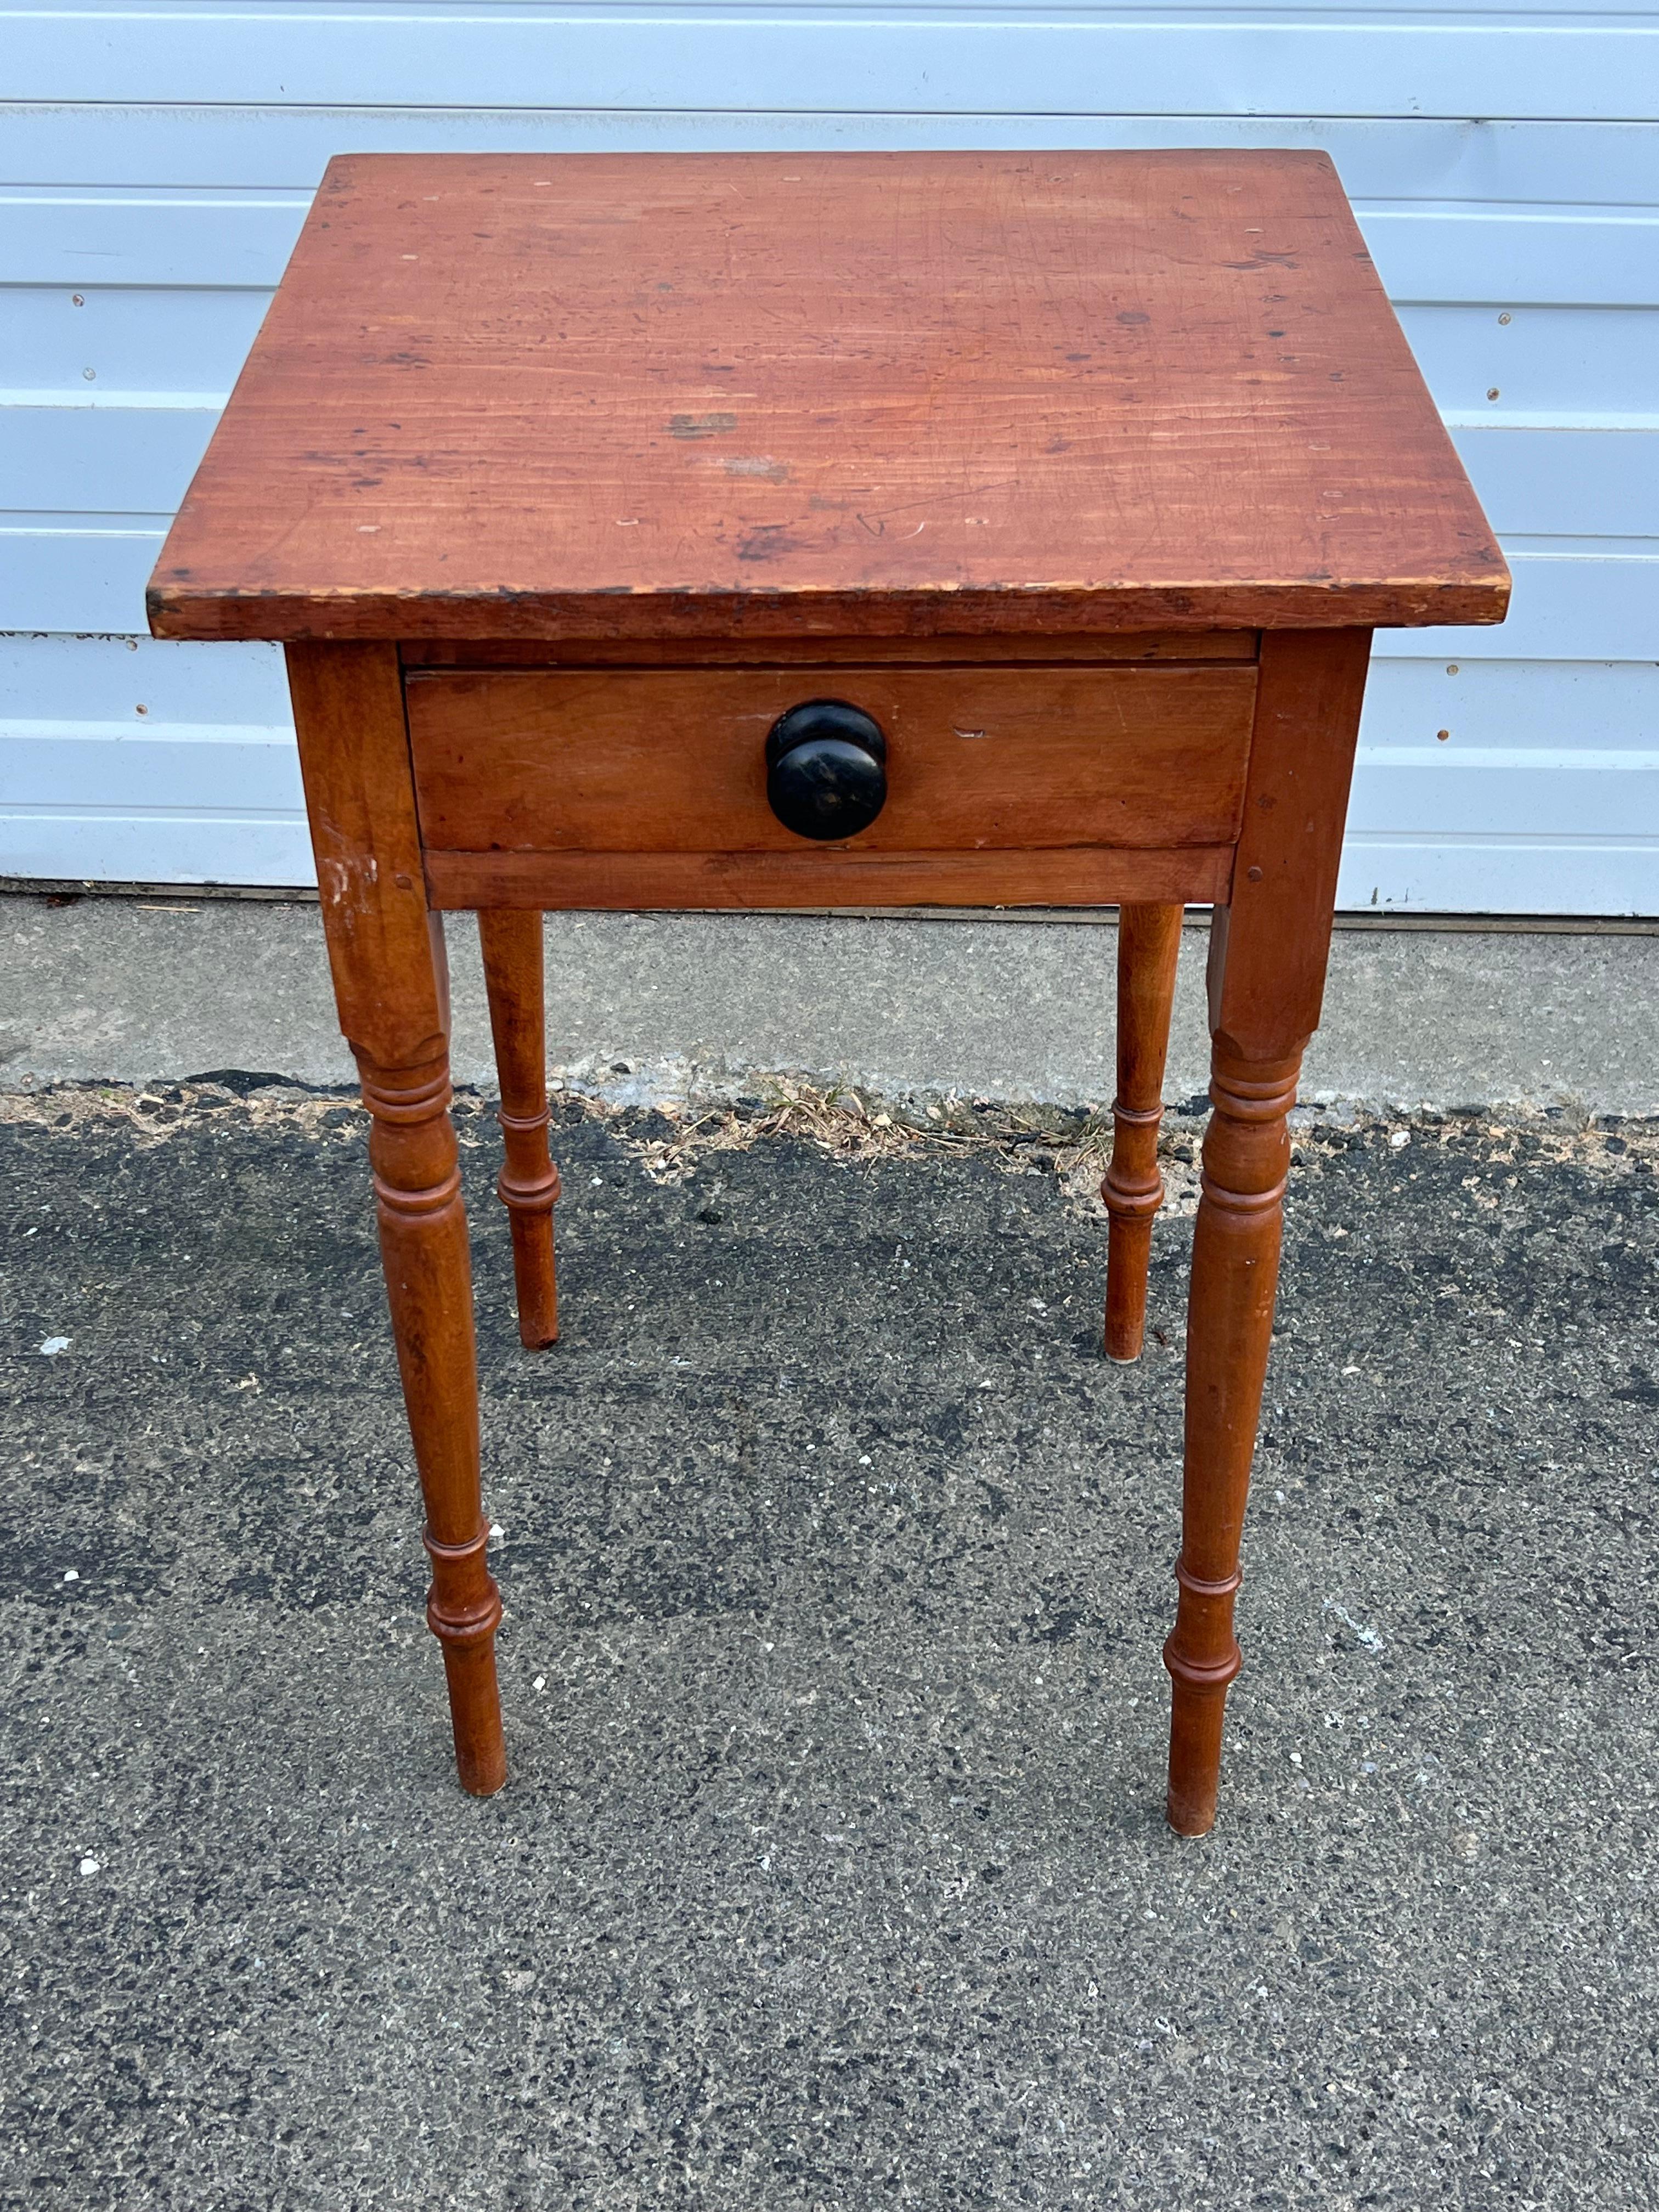 19th century one drawer stand with single board top, black painted turned drawer knob, on delicately turned legs.